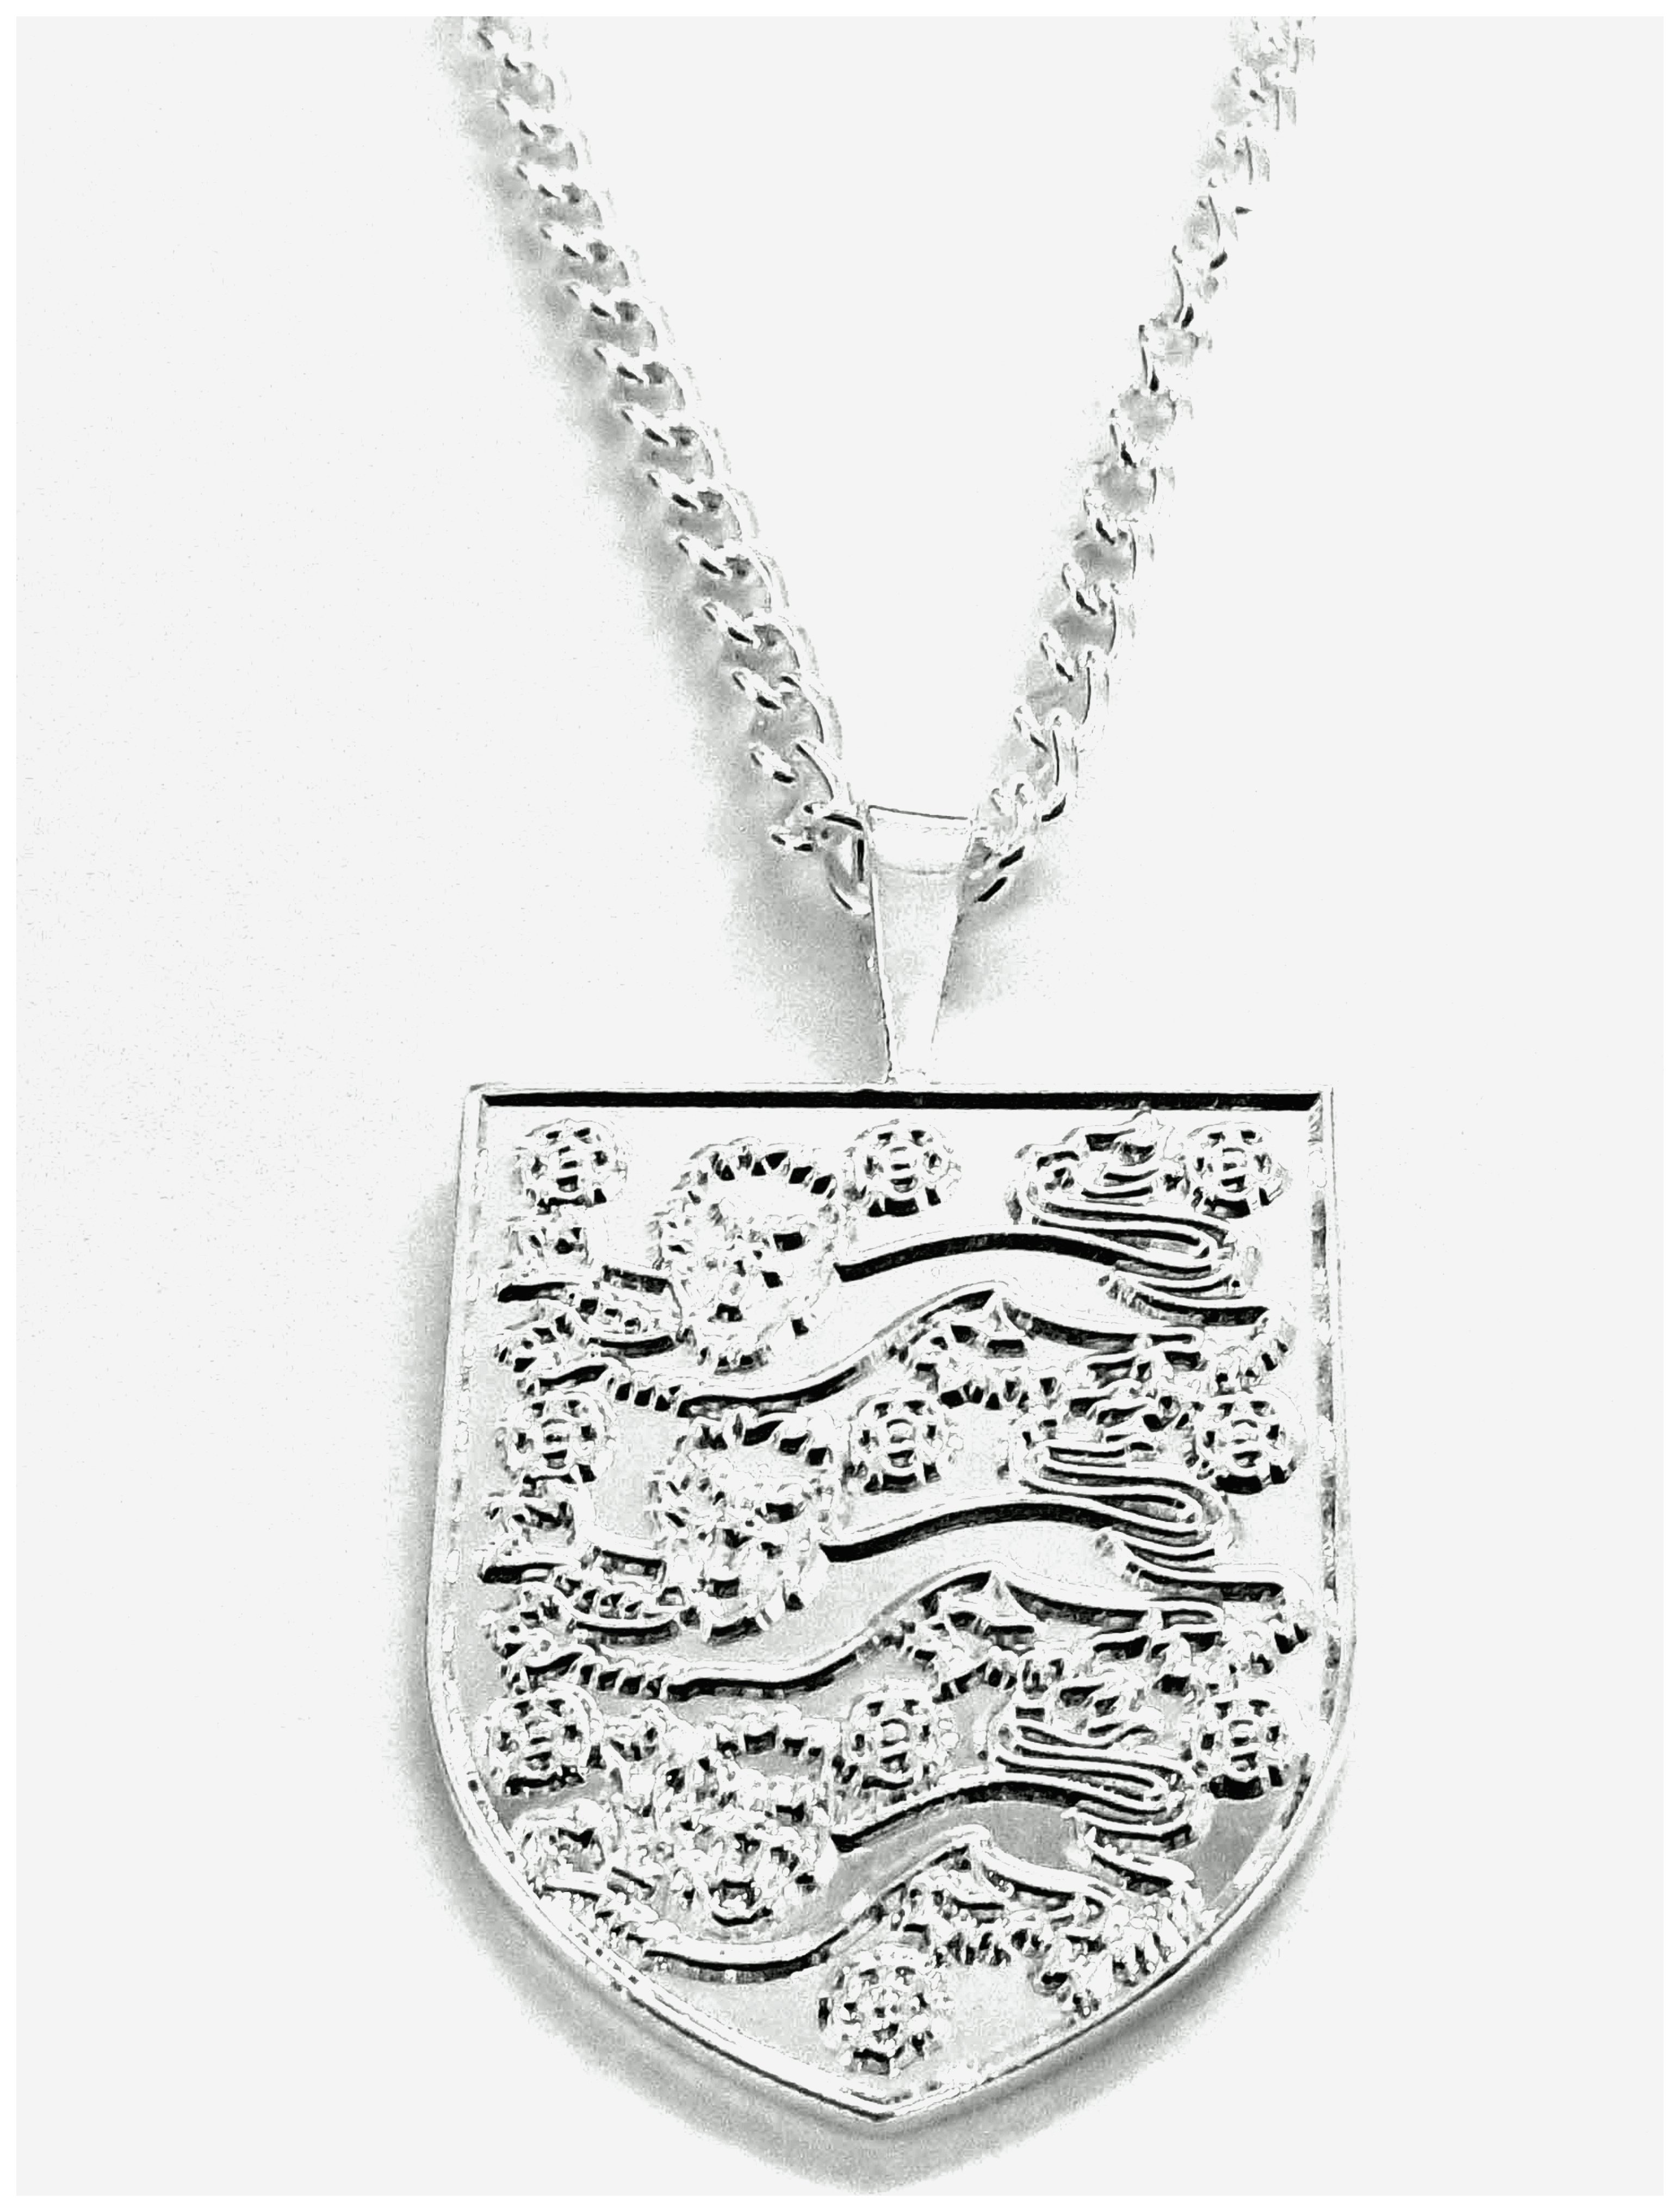 Silver Plated England Pendant and Chain.